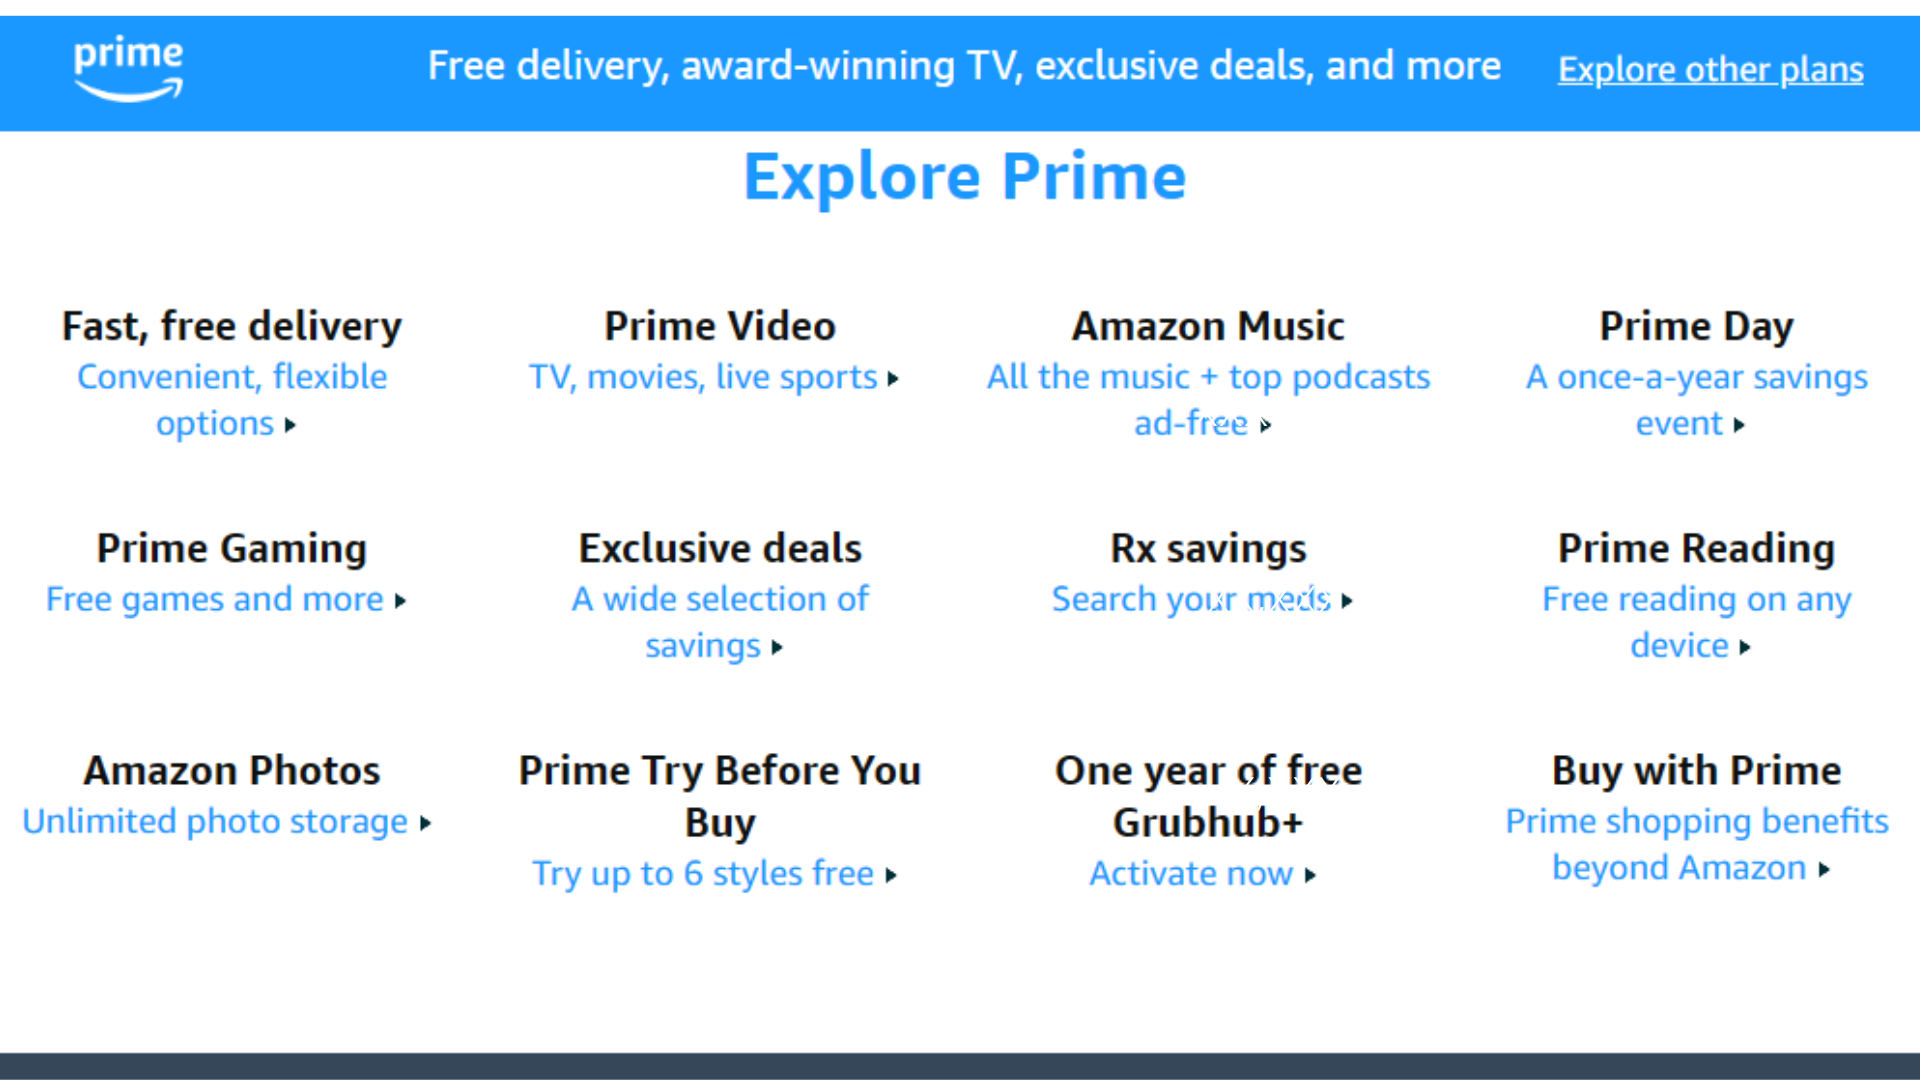 Screenshot of Amazon Prime subscription benefits as an example of a loyalty program best practice